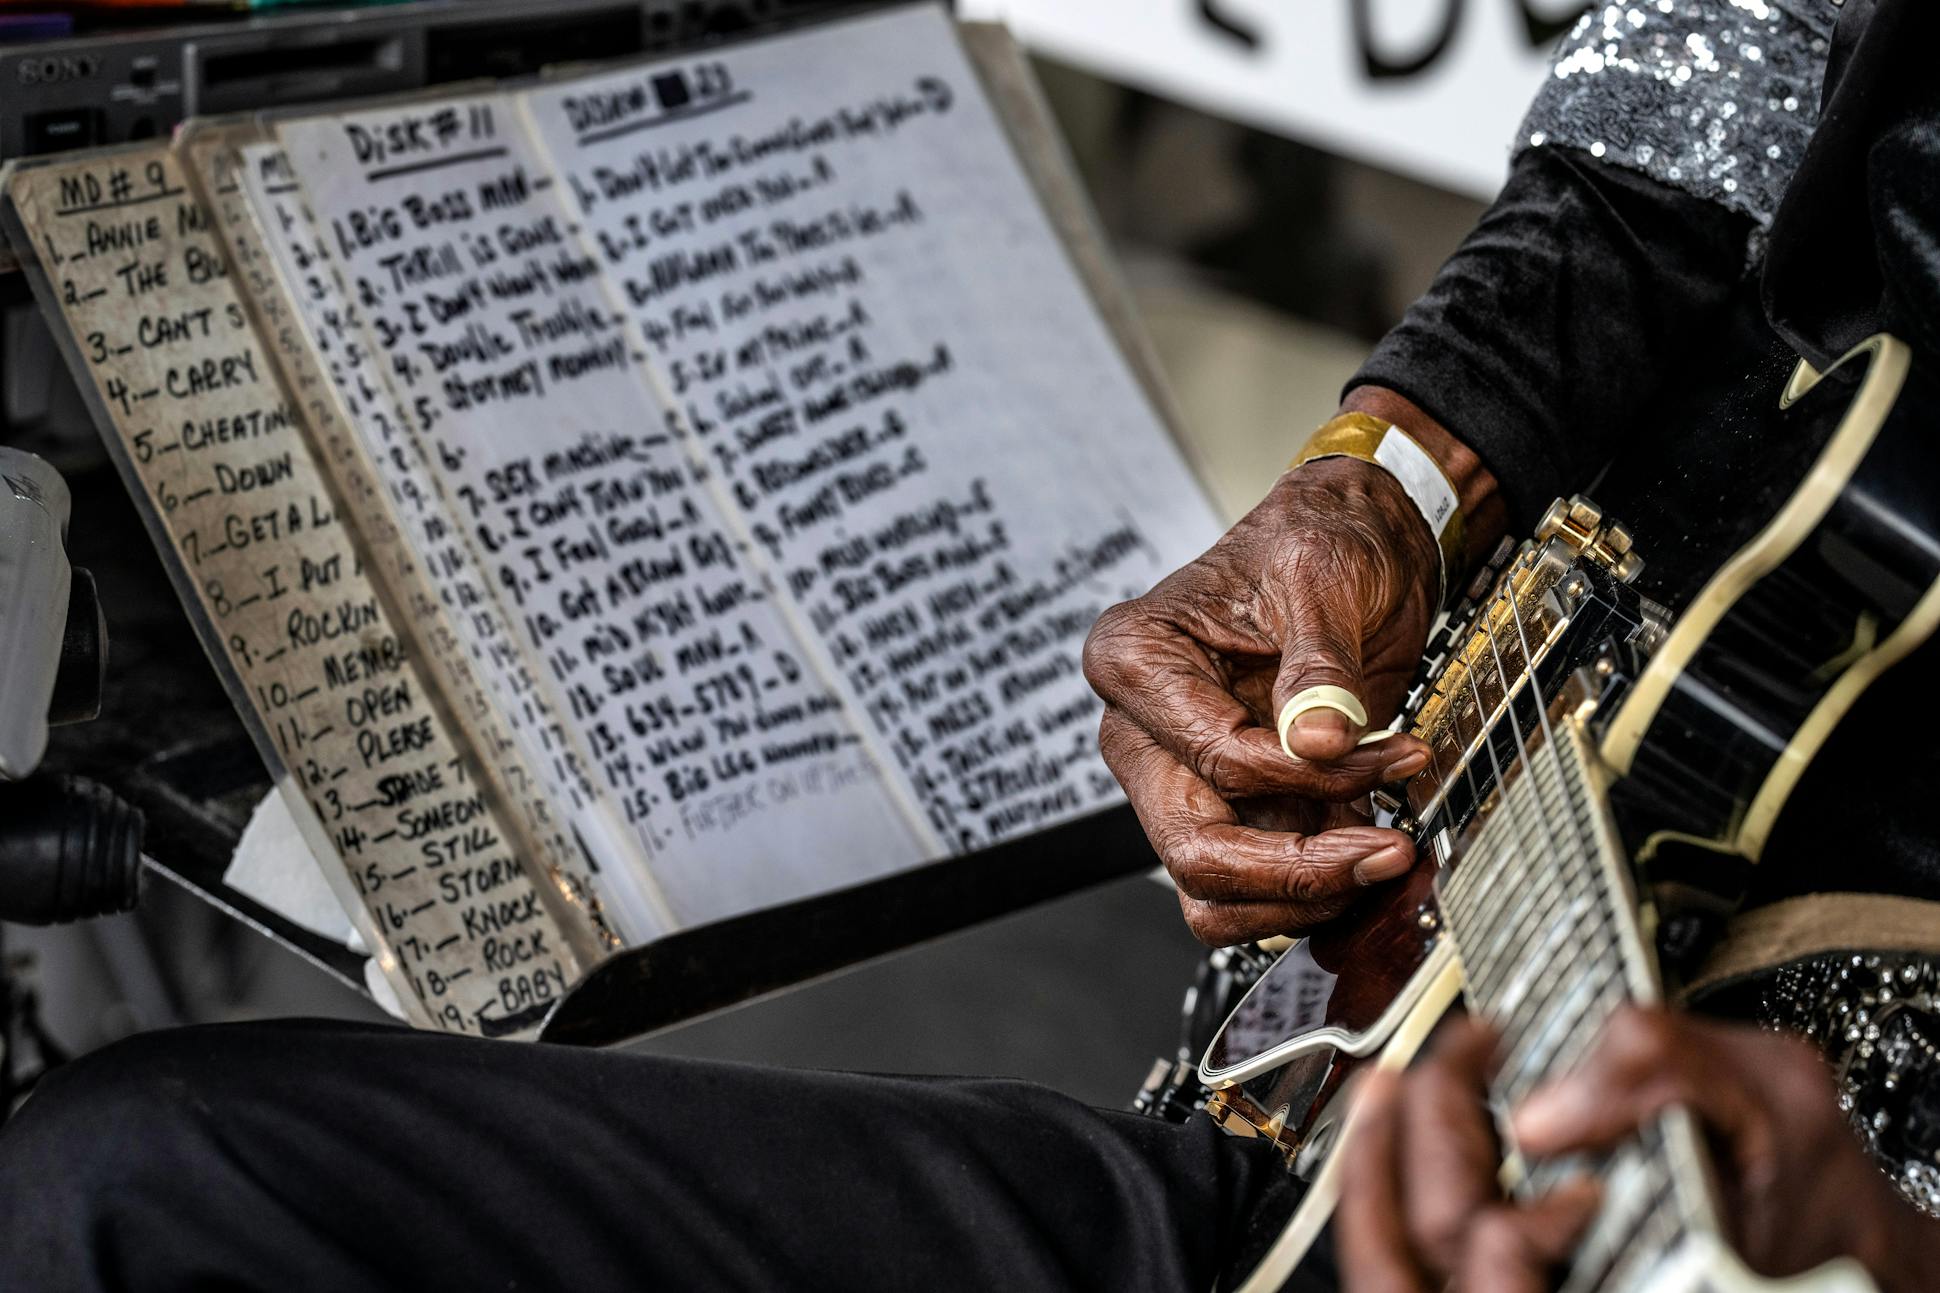 At the King Biscuit Blues Festival in Helena, Ark., Louisiana's sequin-clad Leon Atkins, better known as “Little Jimmy Reed,” 84, checked his set list.